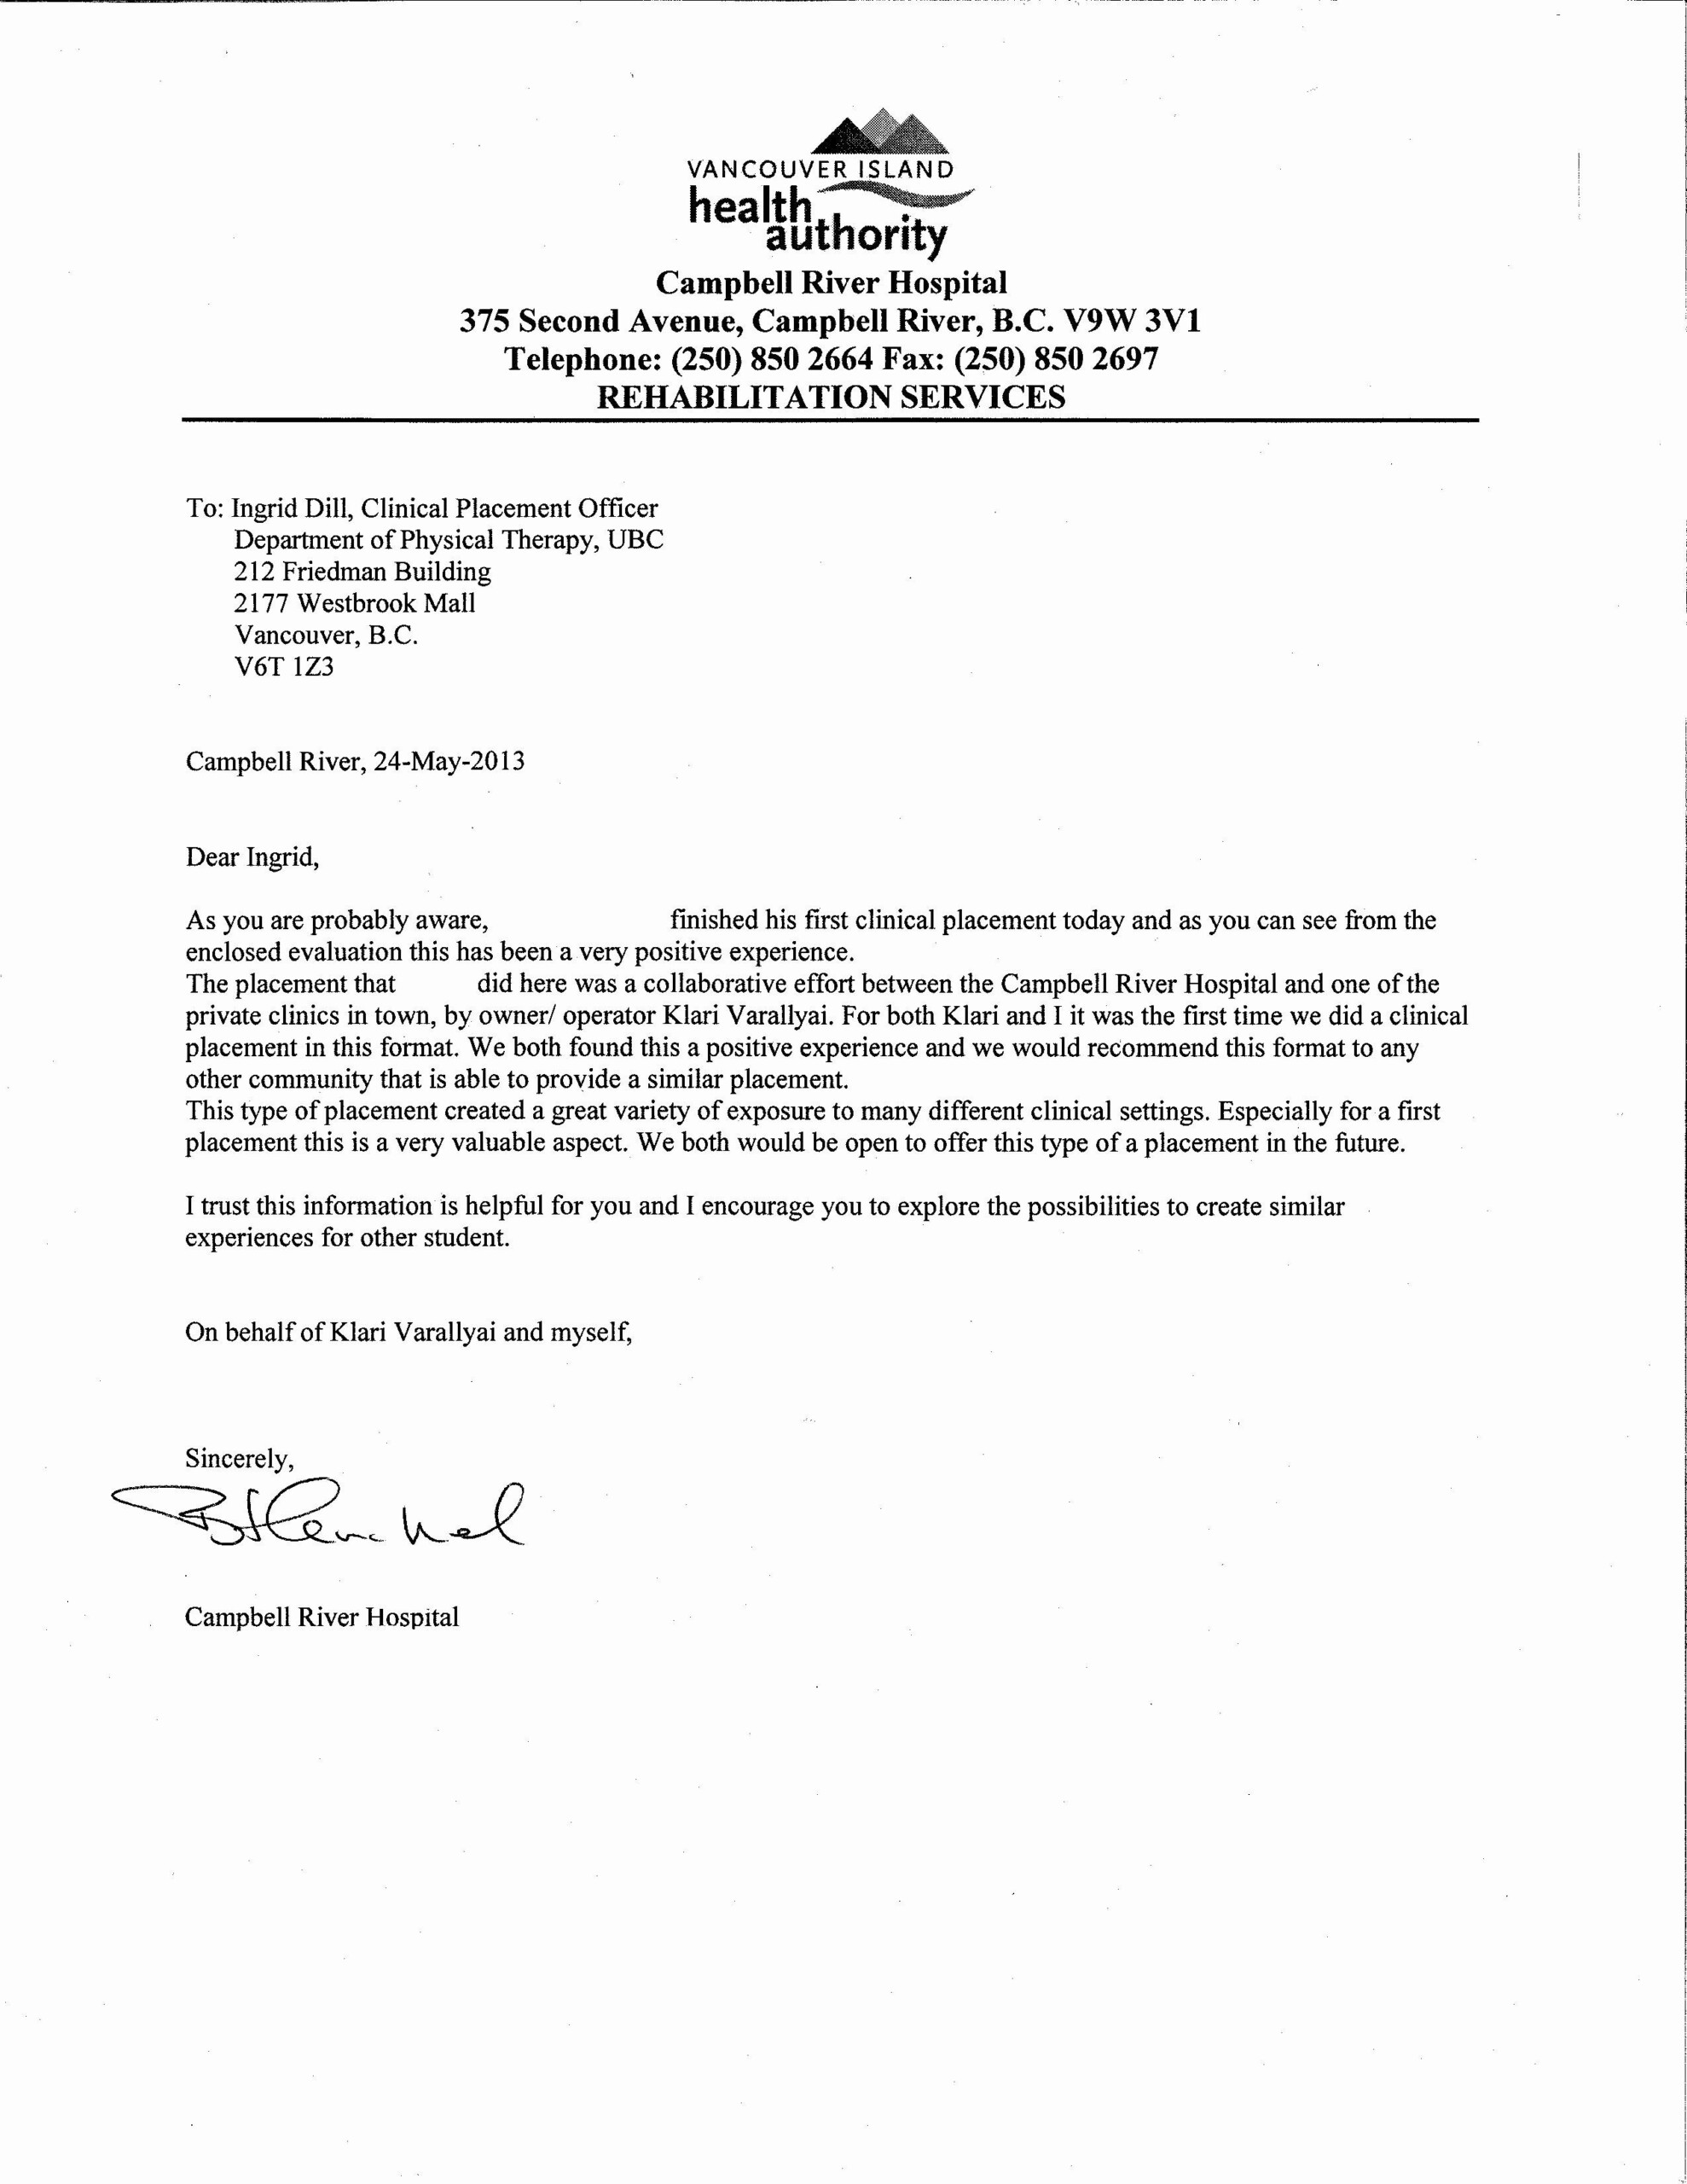 Occupational Therapy Letter Of Recommendation Unique Letter Re